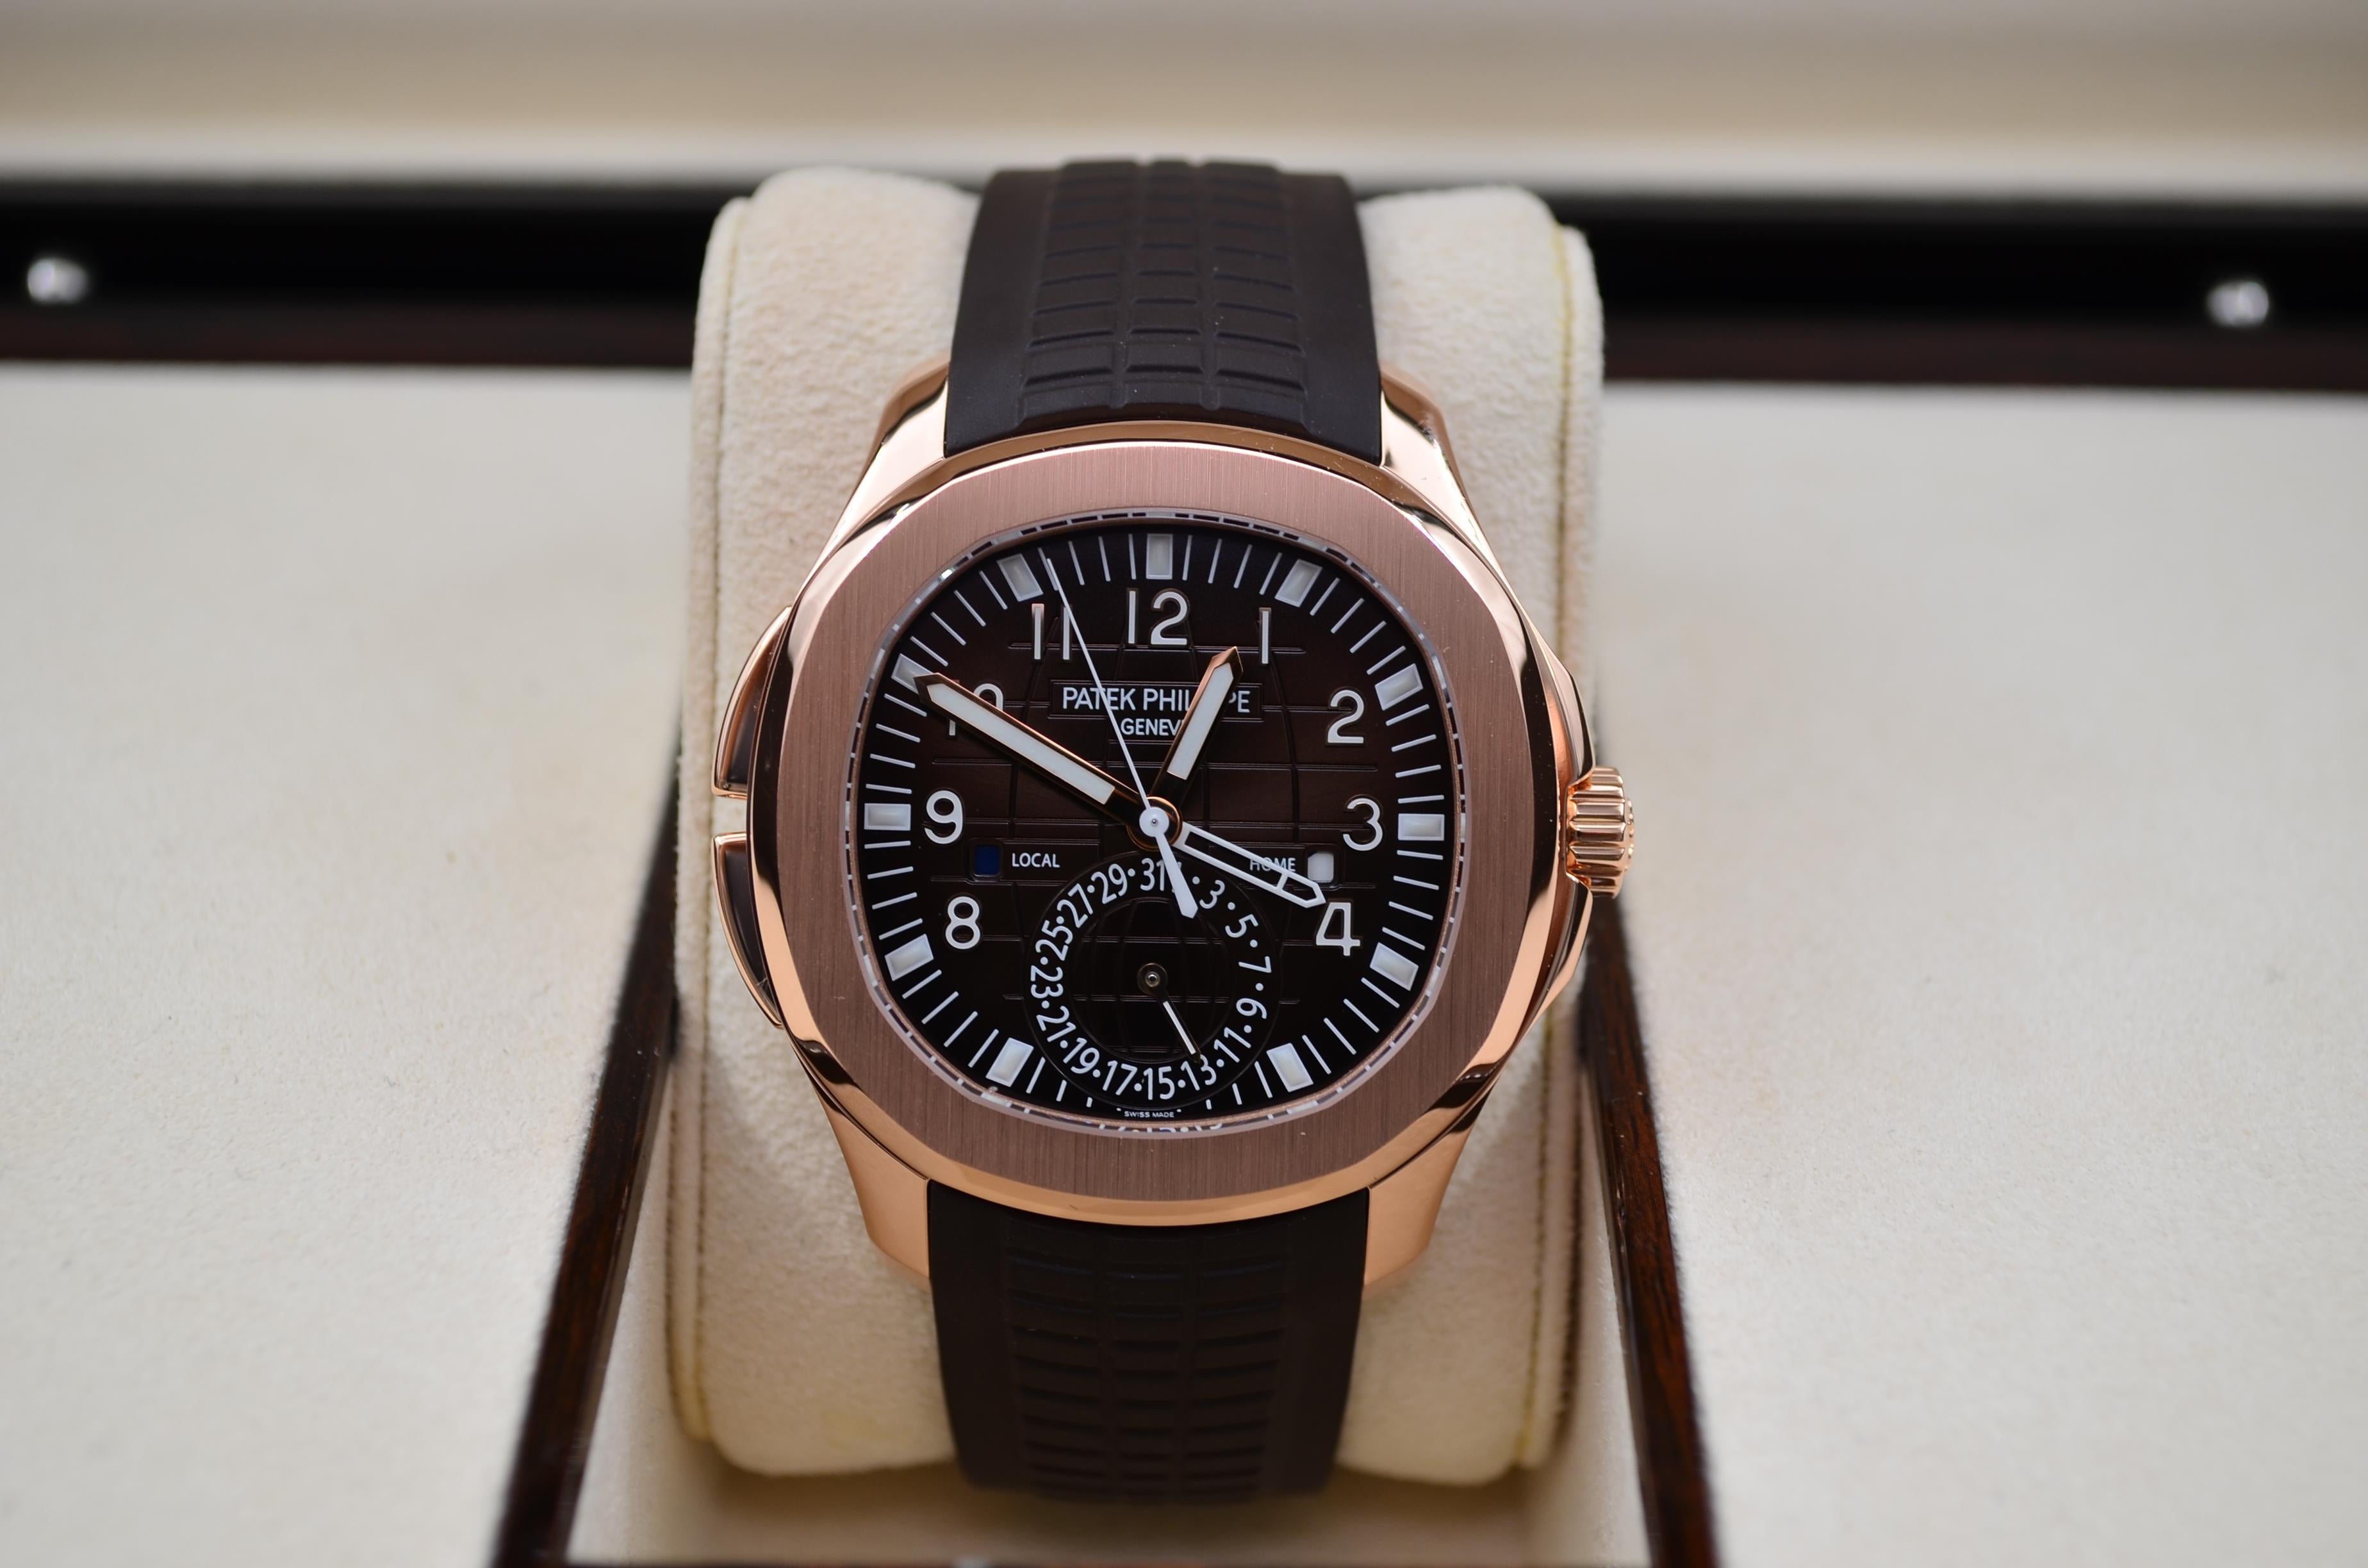 Patek Philippe Aquanaut Travel Time Rose Gold Full Set 2018 40.8mm Ref 5164R-001 In Excellent Condition For Sale In București, RO